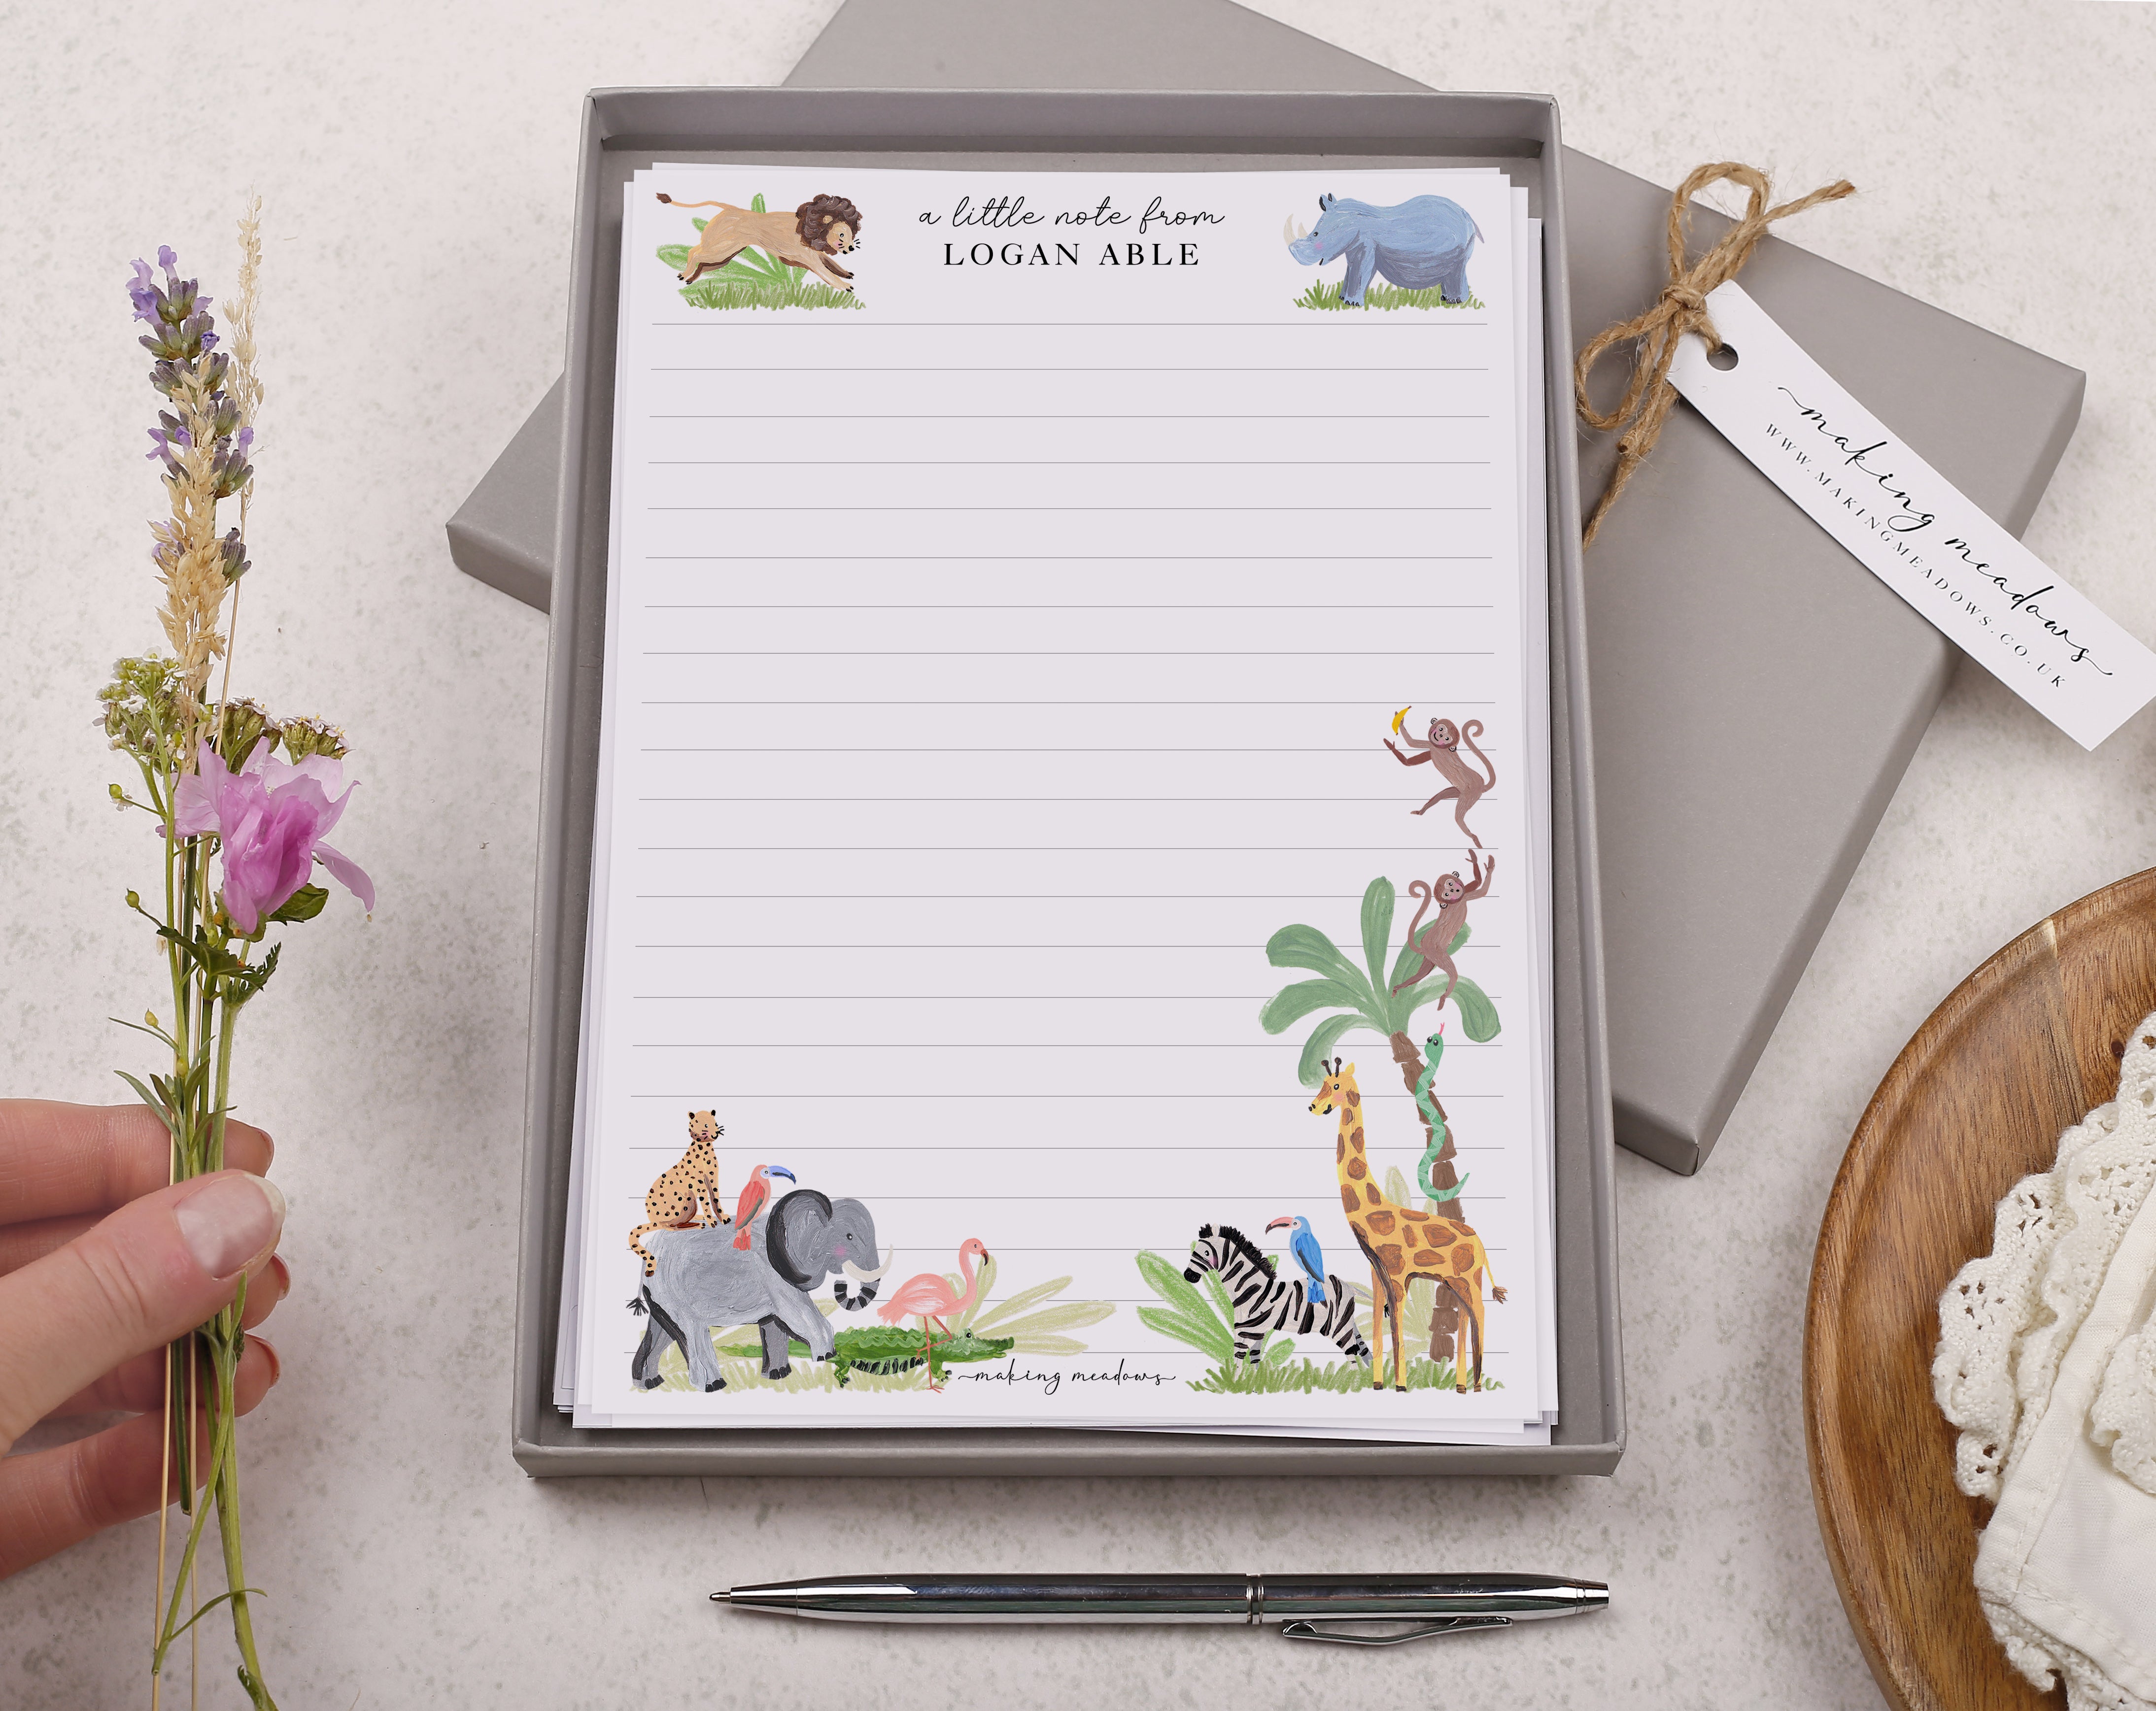 Premium personalised A5 letter writing paper set for children with safari animals in the jungle design.